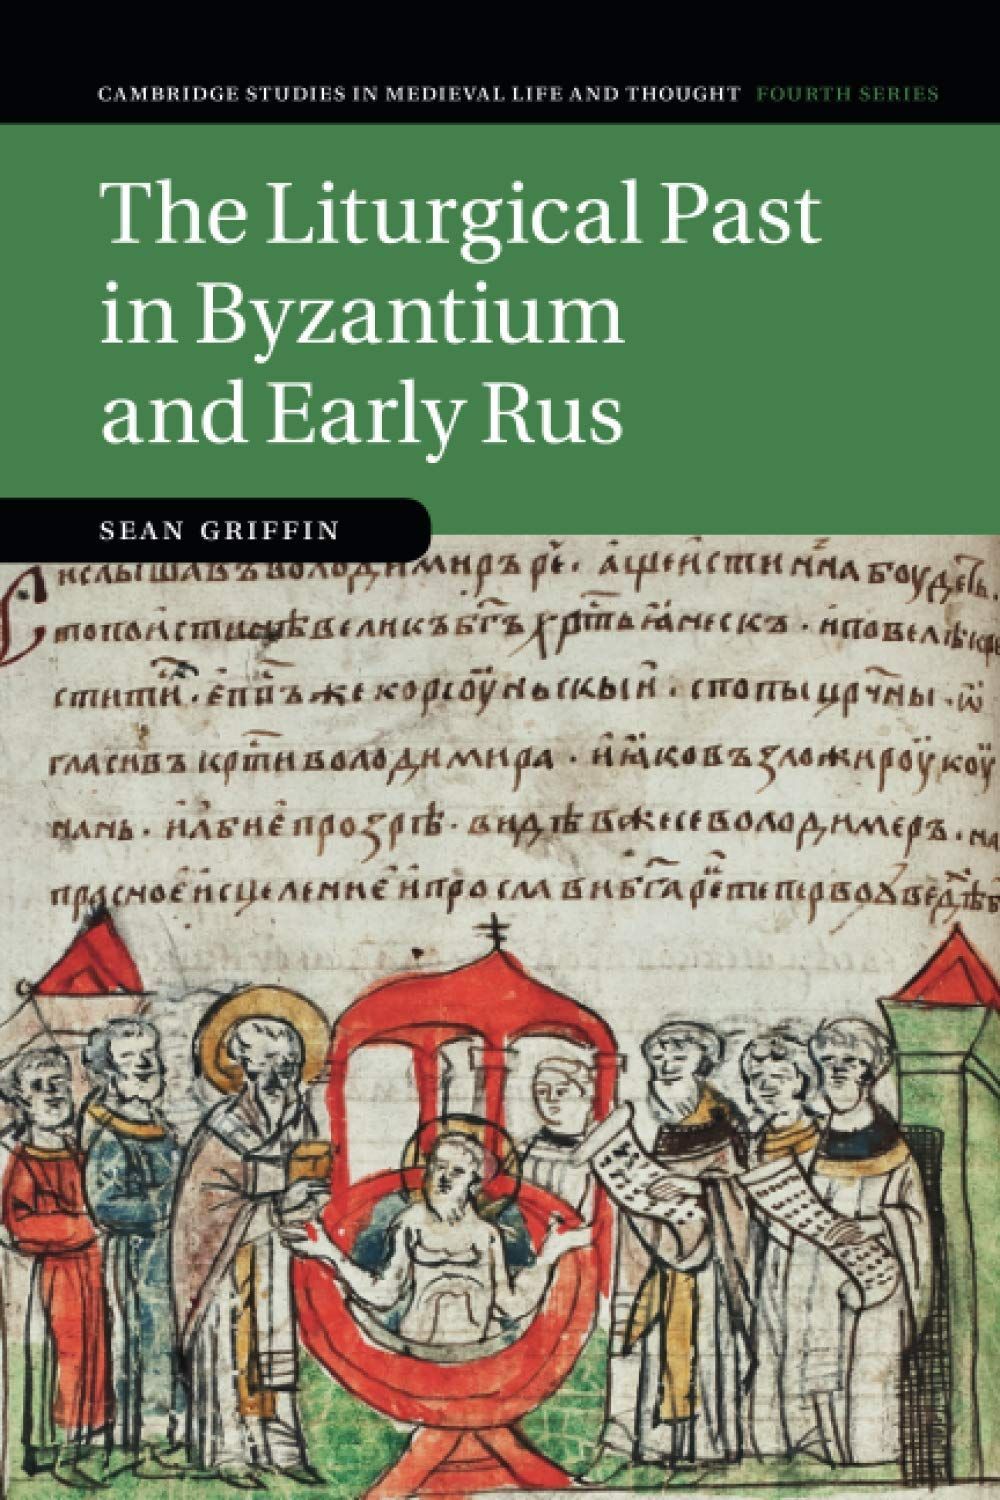 Pointing Out the Elephant: On Sean Griffin’s “The Liturgical Past in Byzantium and Early Rus”